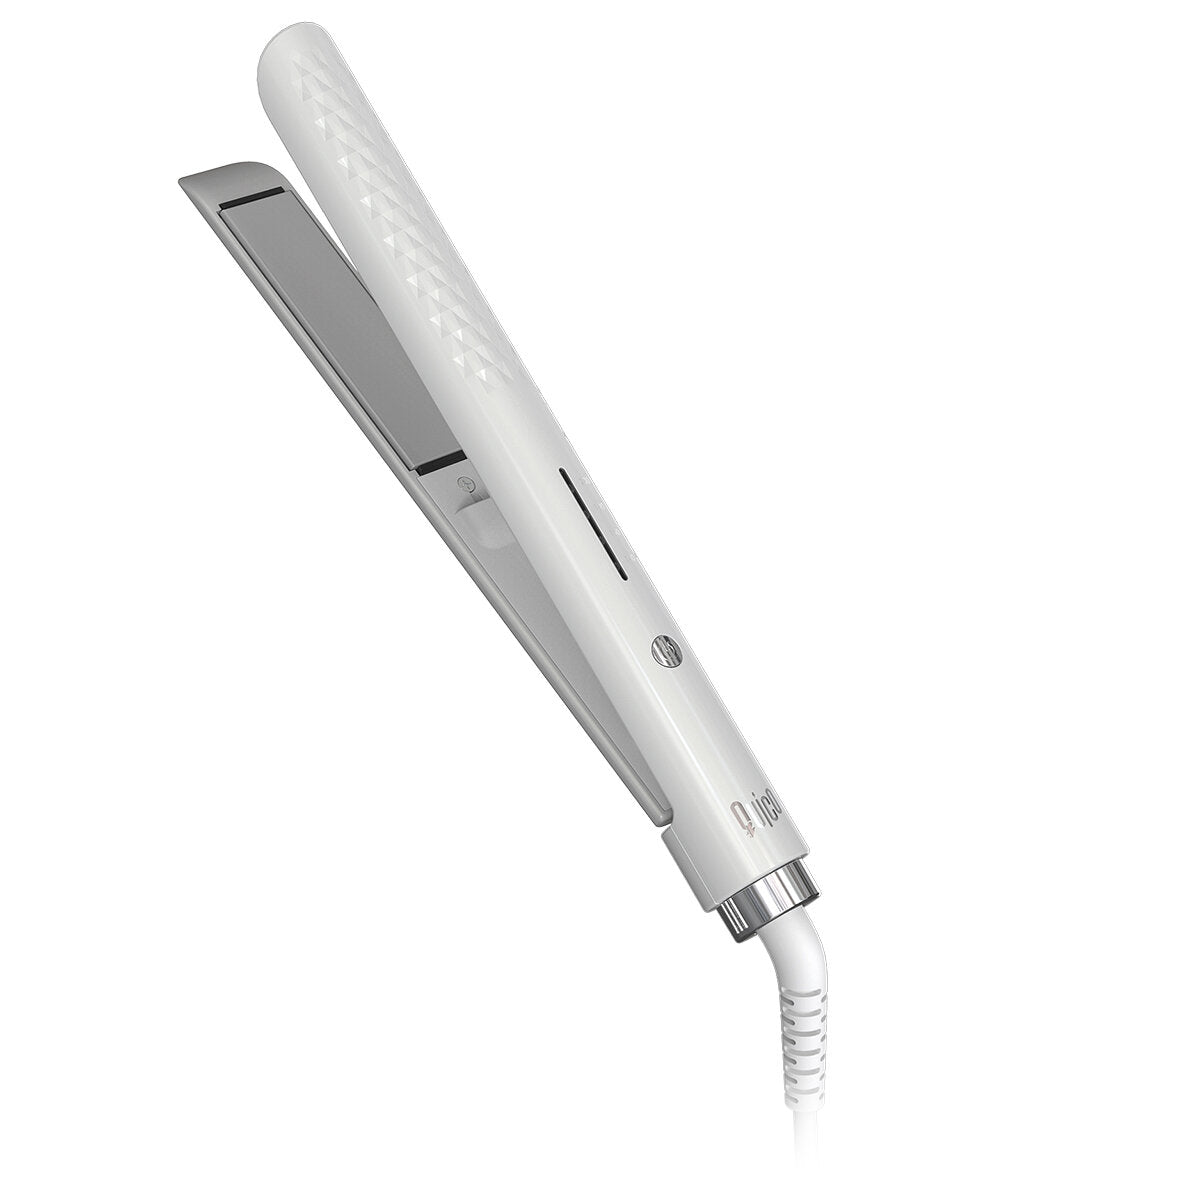 Quico - Light styler | Straightener | Curling iron | Negative ion function - Pearl White